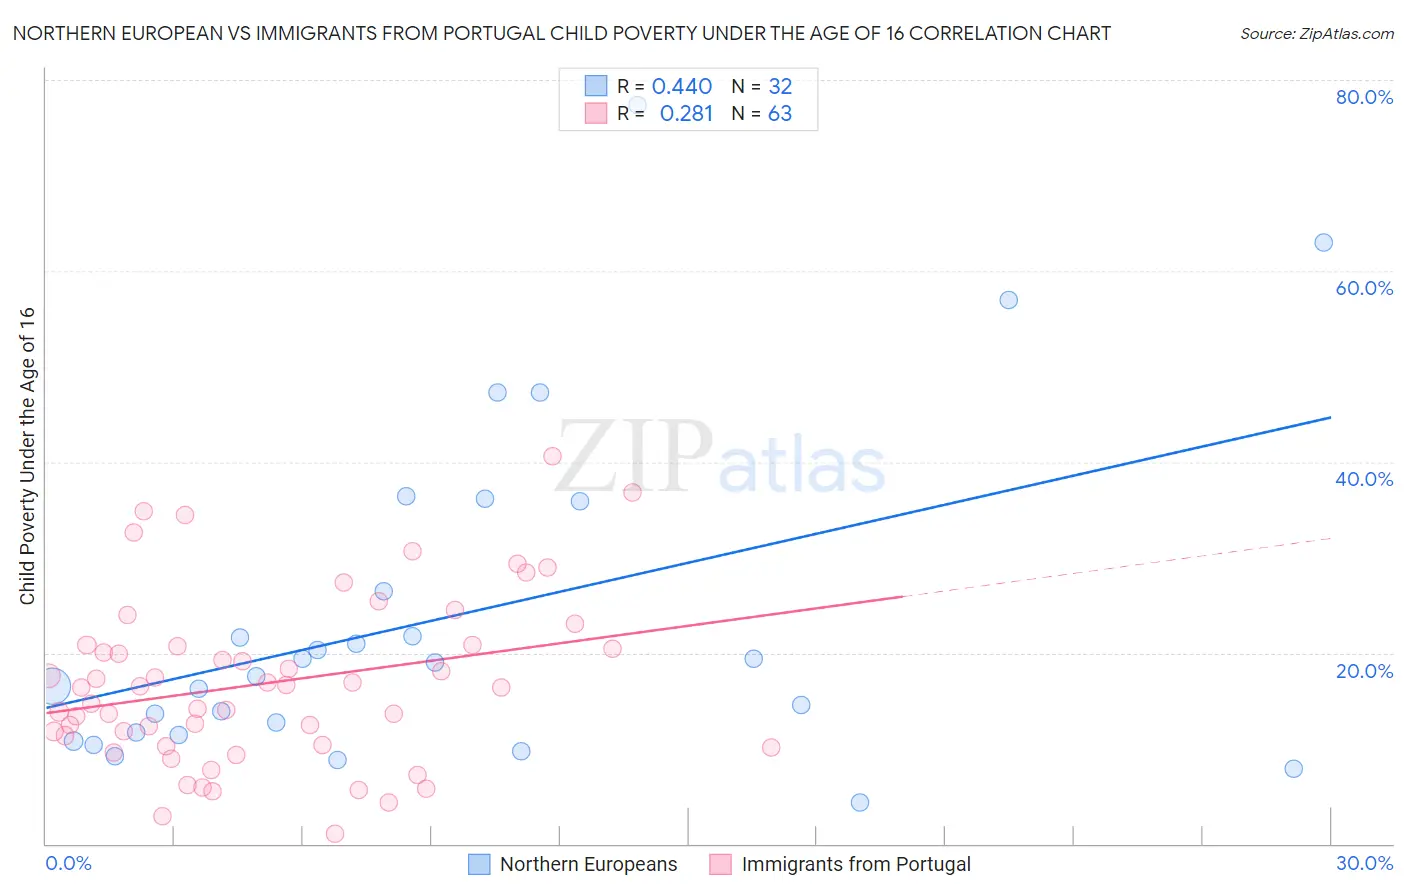 Northern European vs Immigrants from Portugal Child Poverty Under the Age of 16